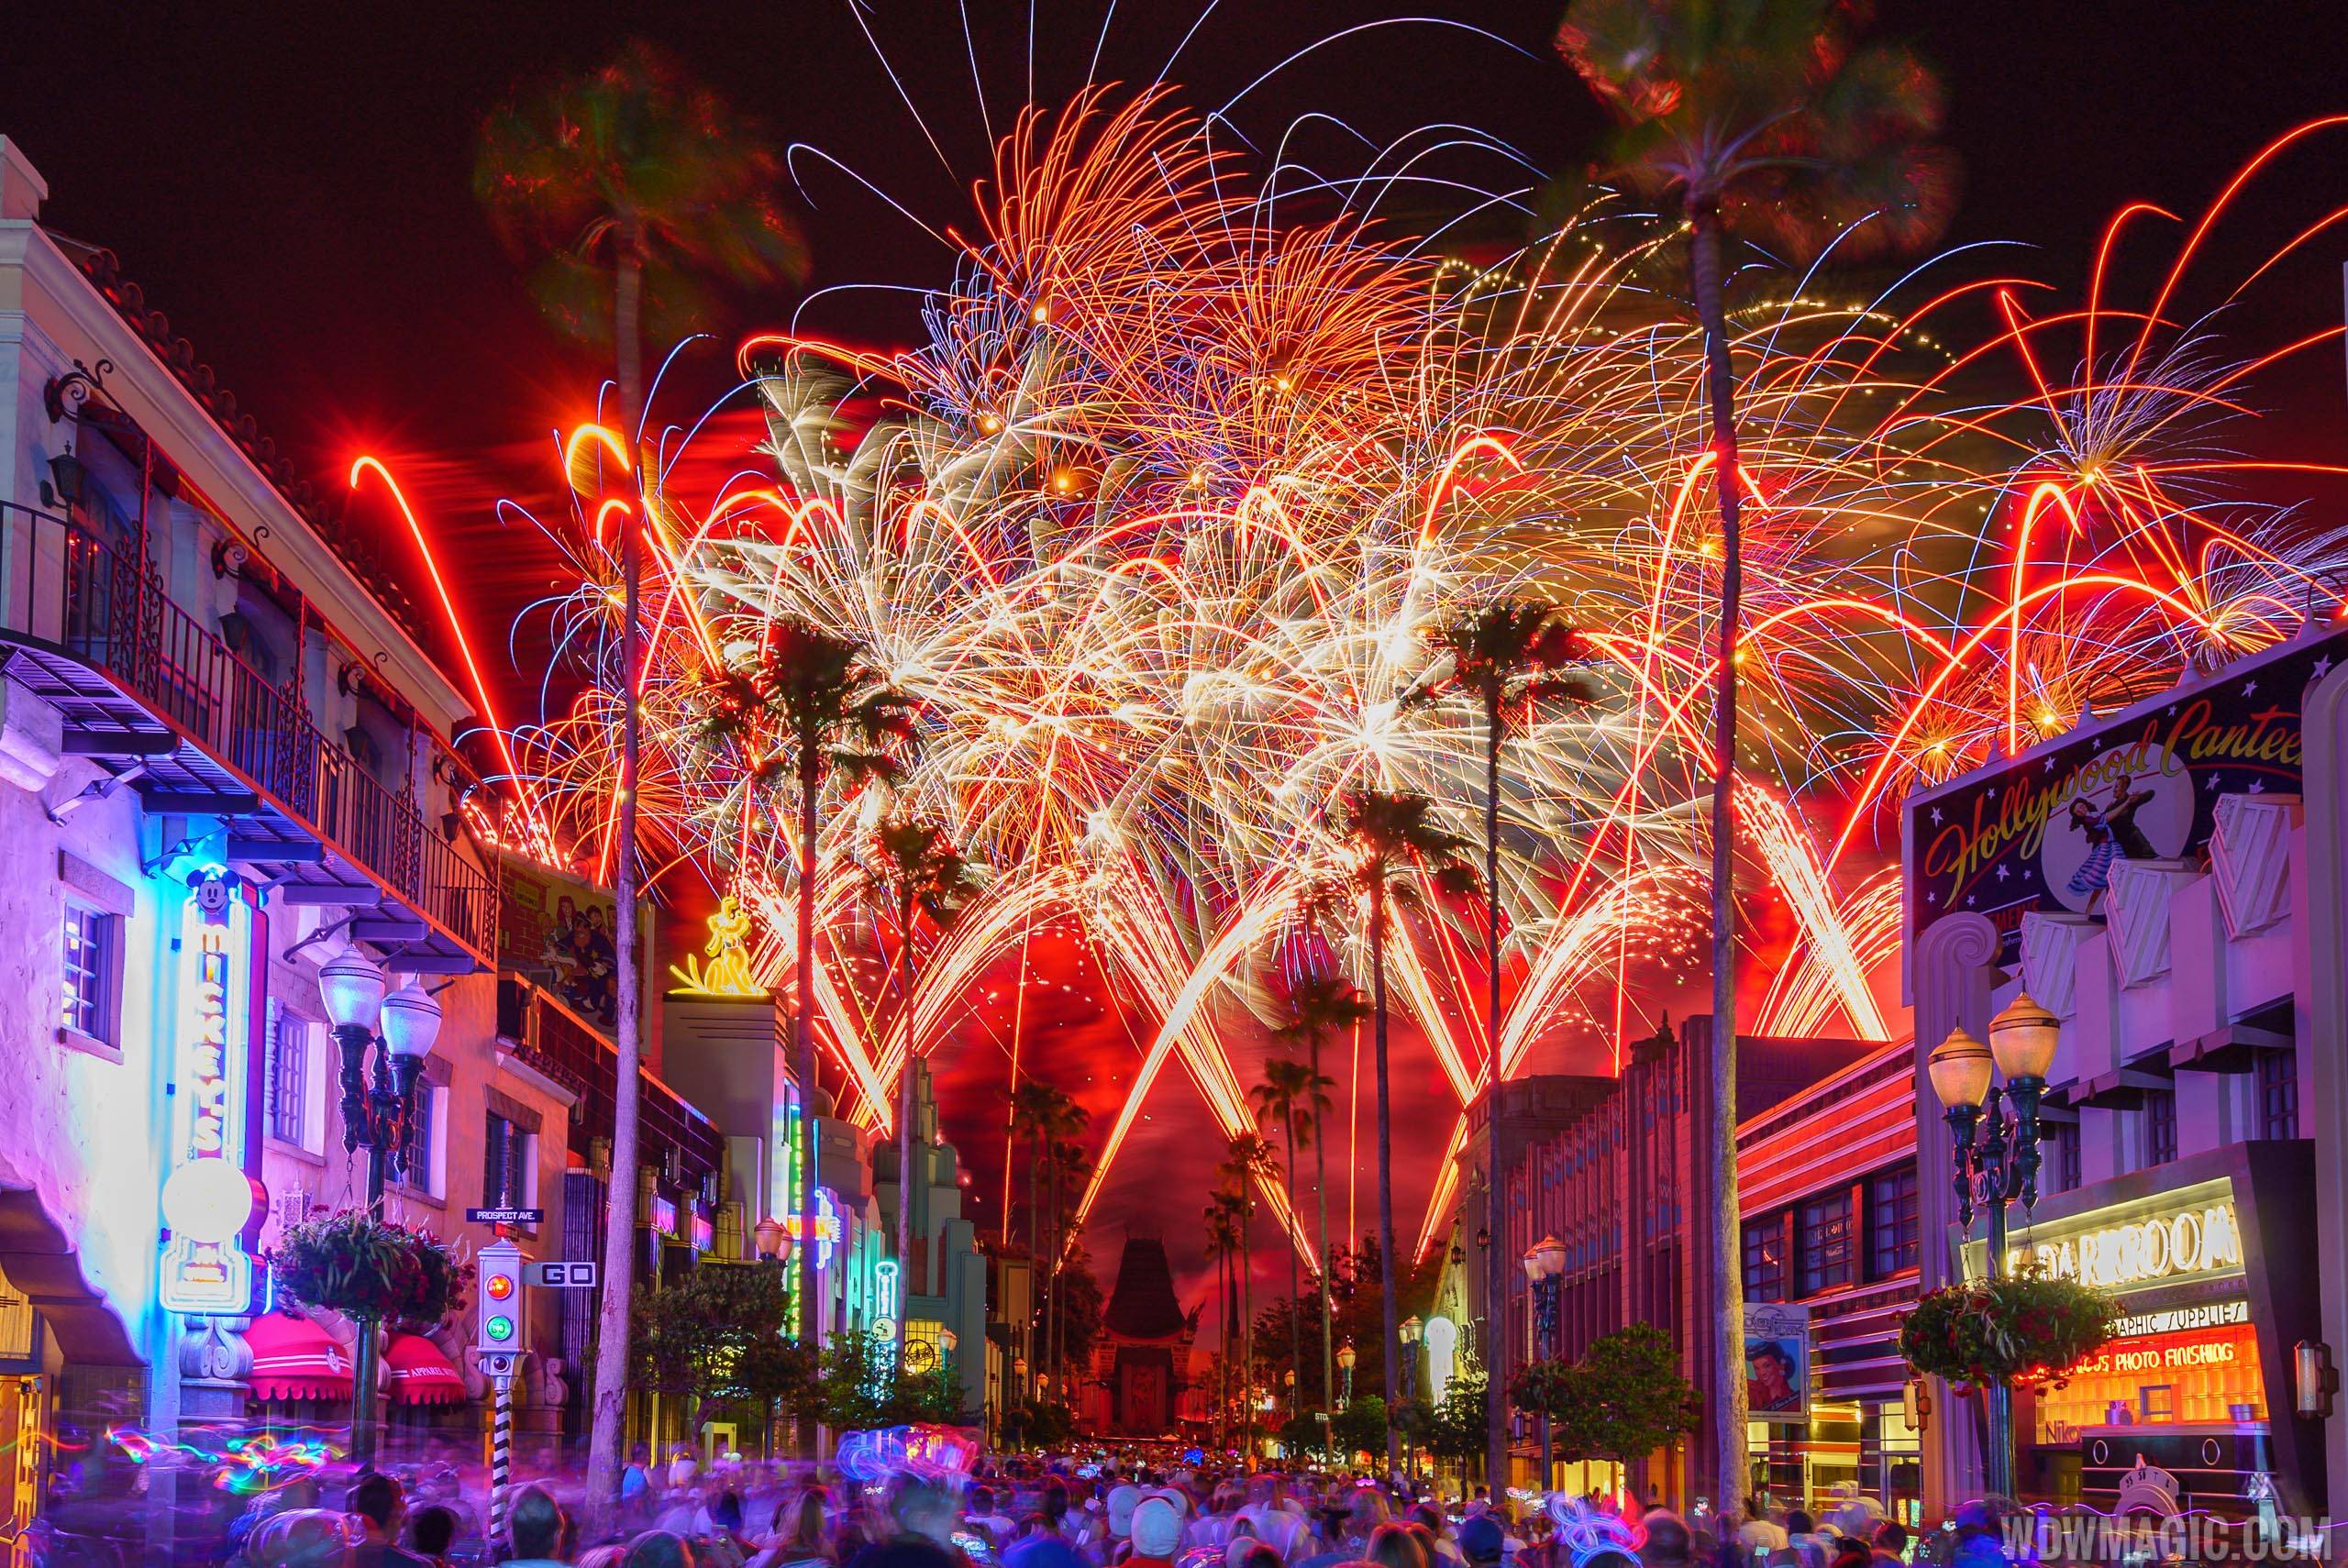 Symphony in the Stars fireworks now scheduled through to at least the end of April